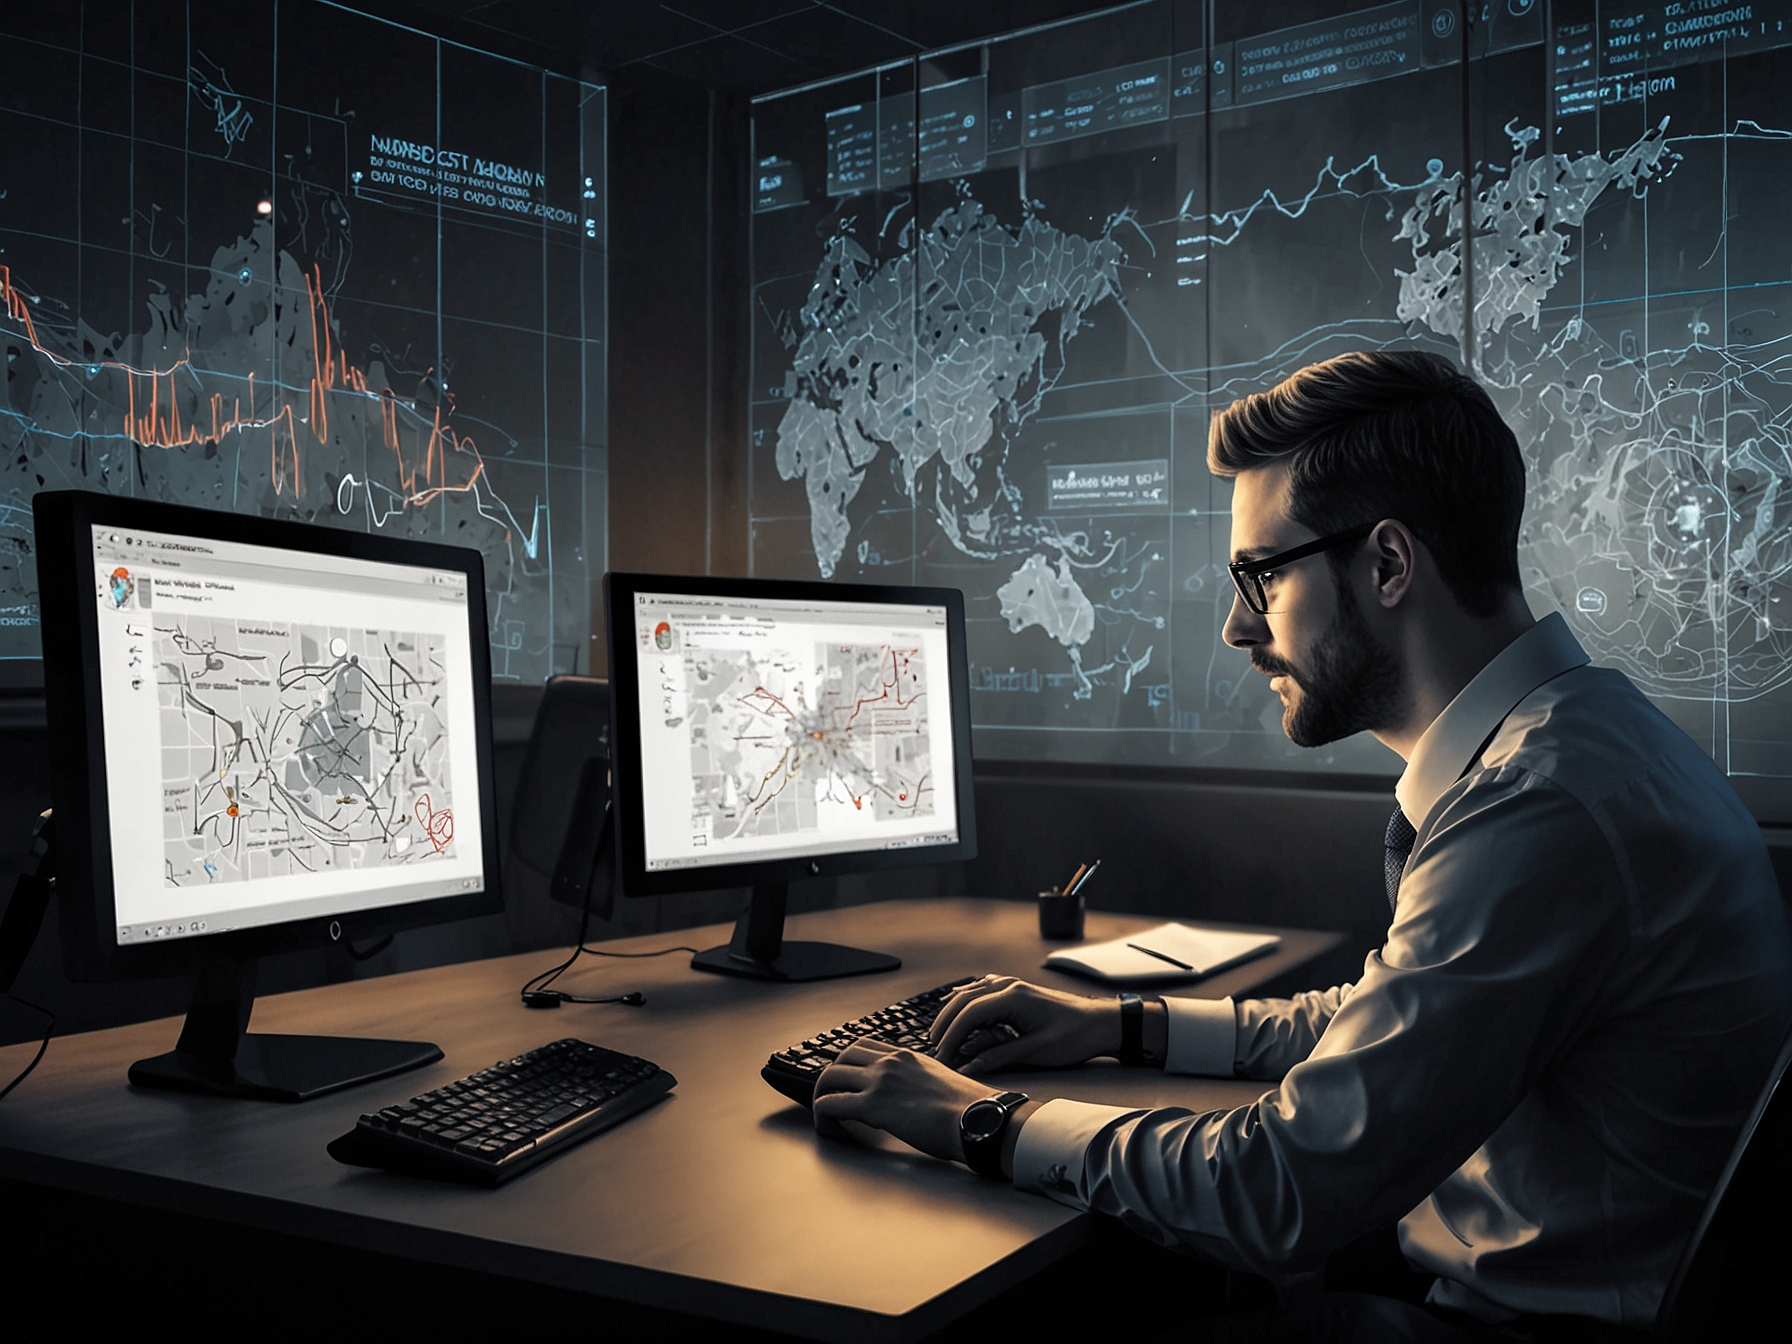 An illustration of a corporate training session where employees are being educated on cybersecurity threats using real-time threat intelligence data. This showcases active engagement and learning.